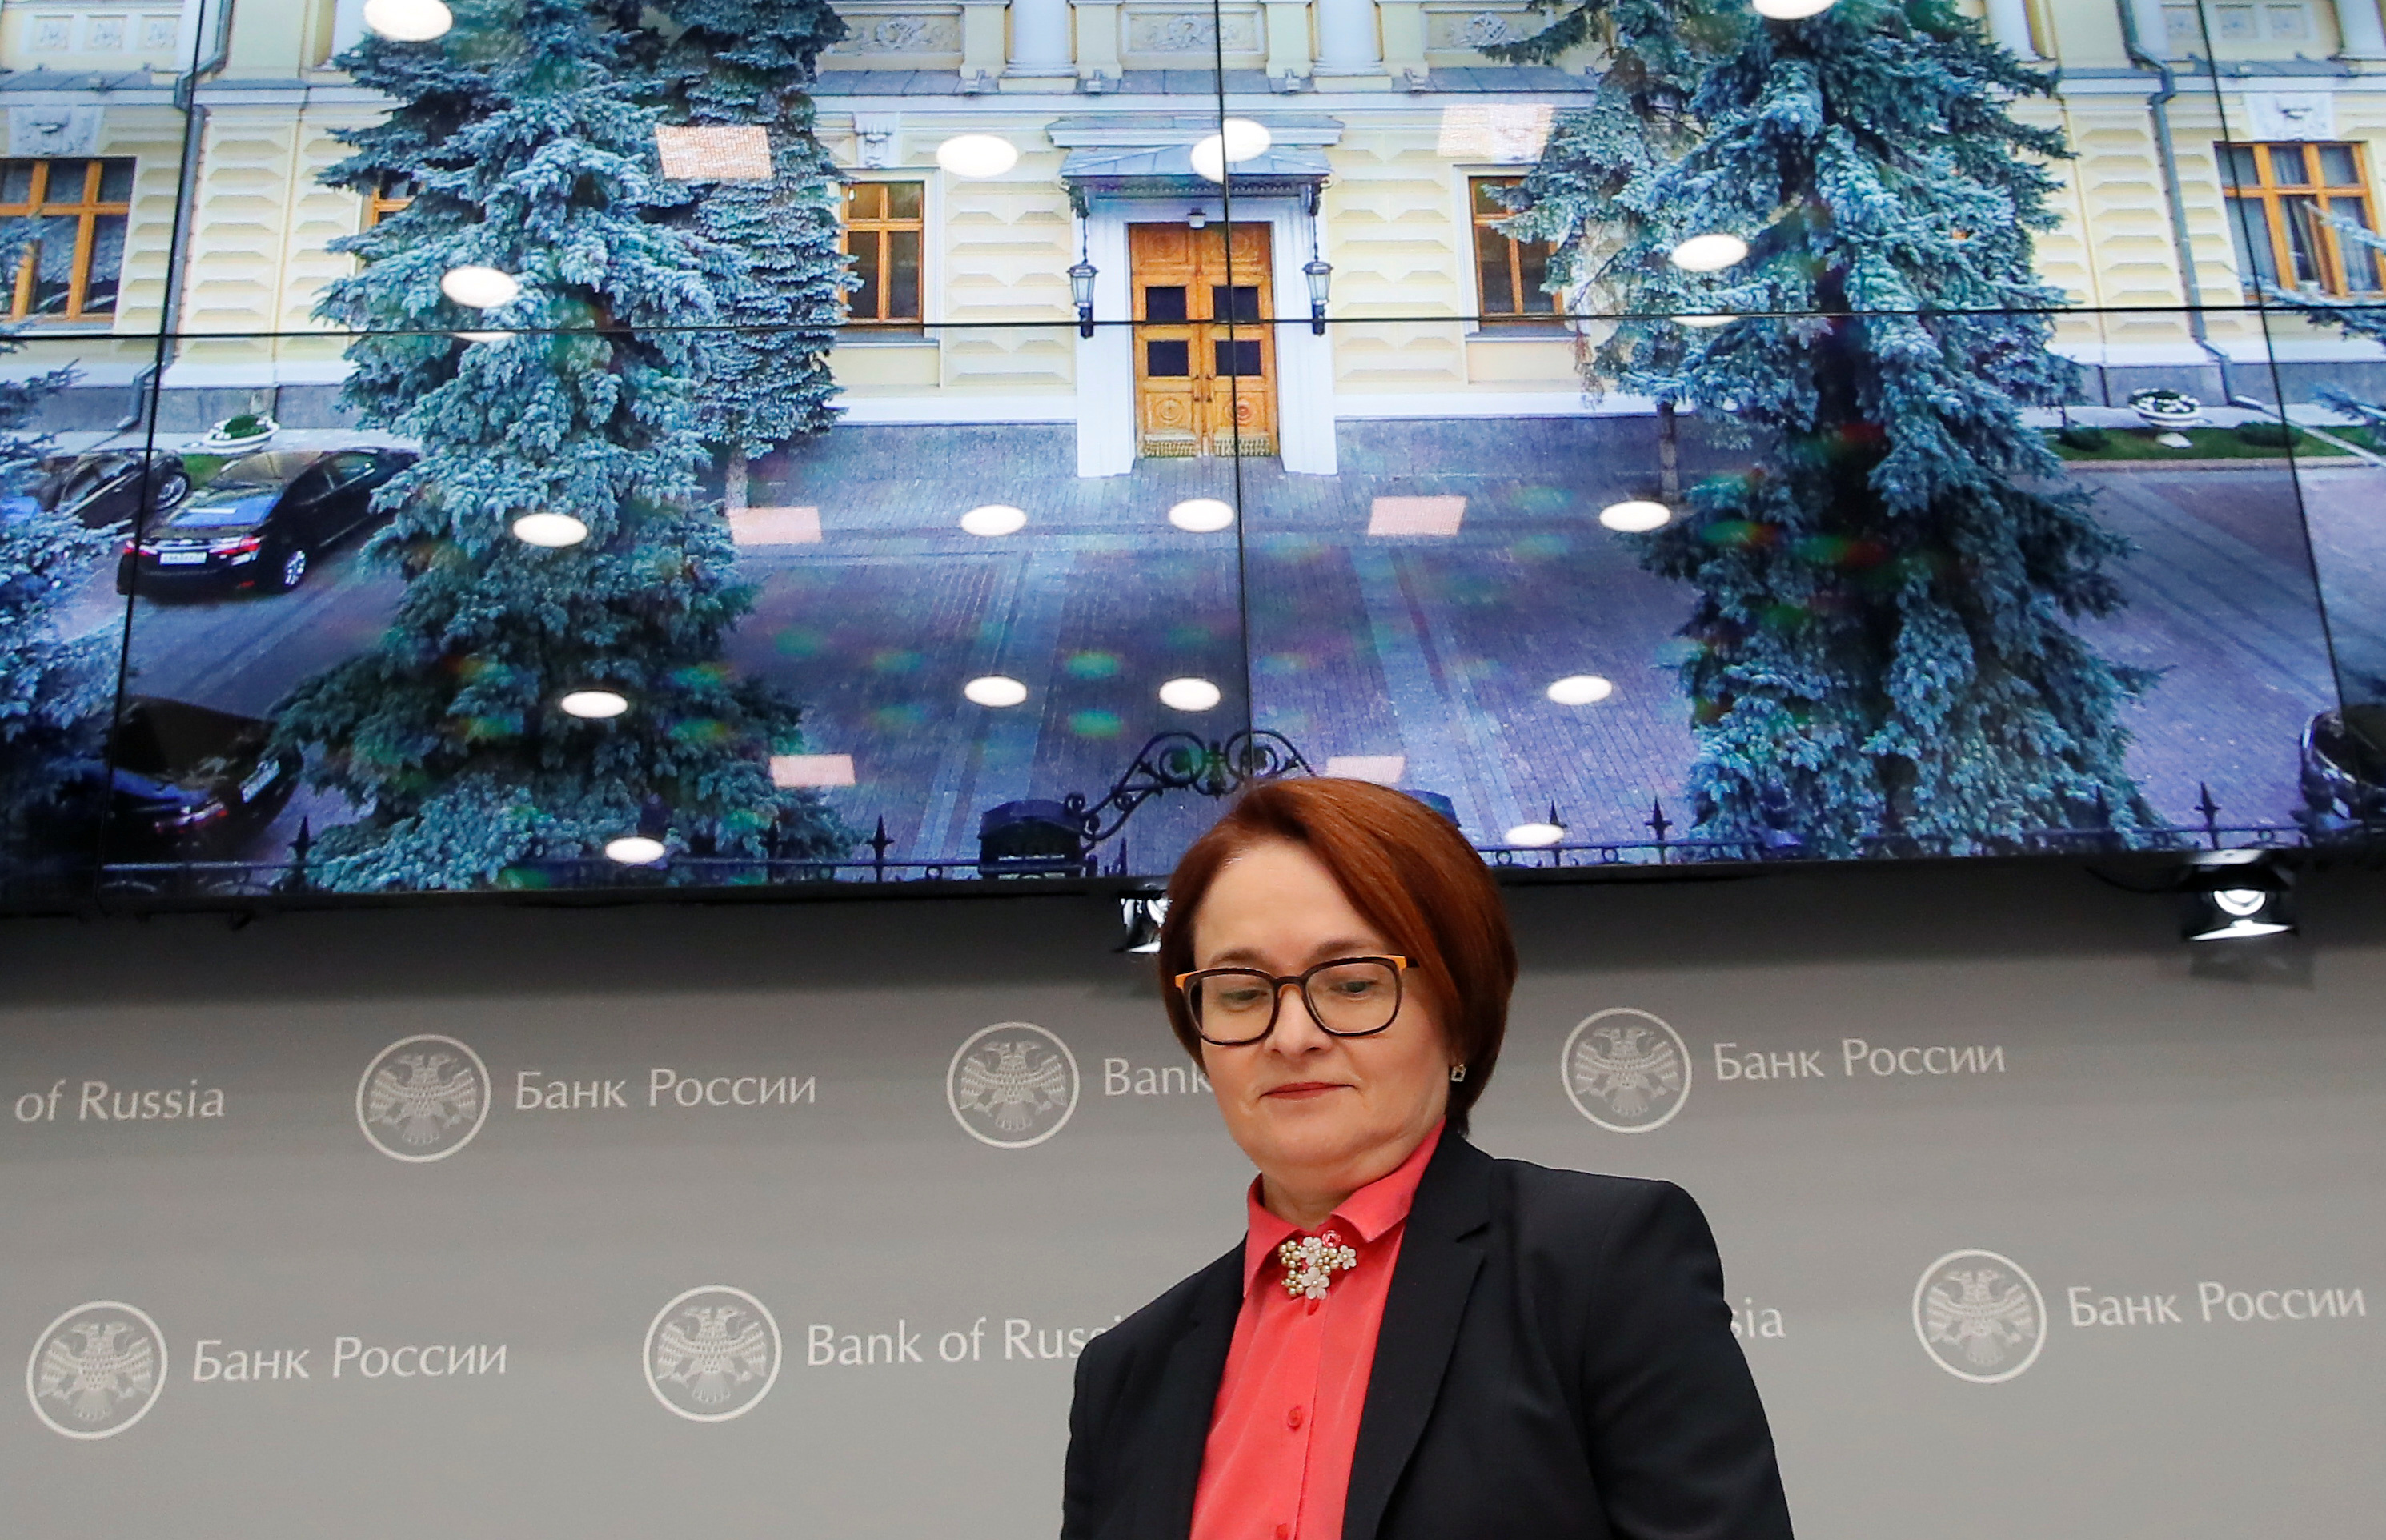 Russian Central Bank Governor Elvira Nabiullina attends a news conference in Moscow, Russia March 22, 2019. REUTERS/Maxim Shemetov